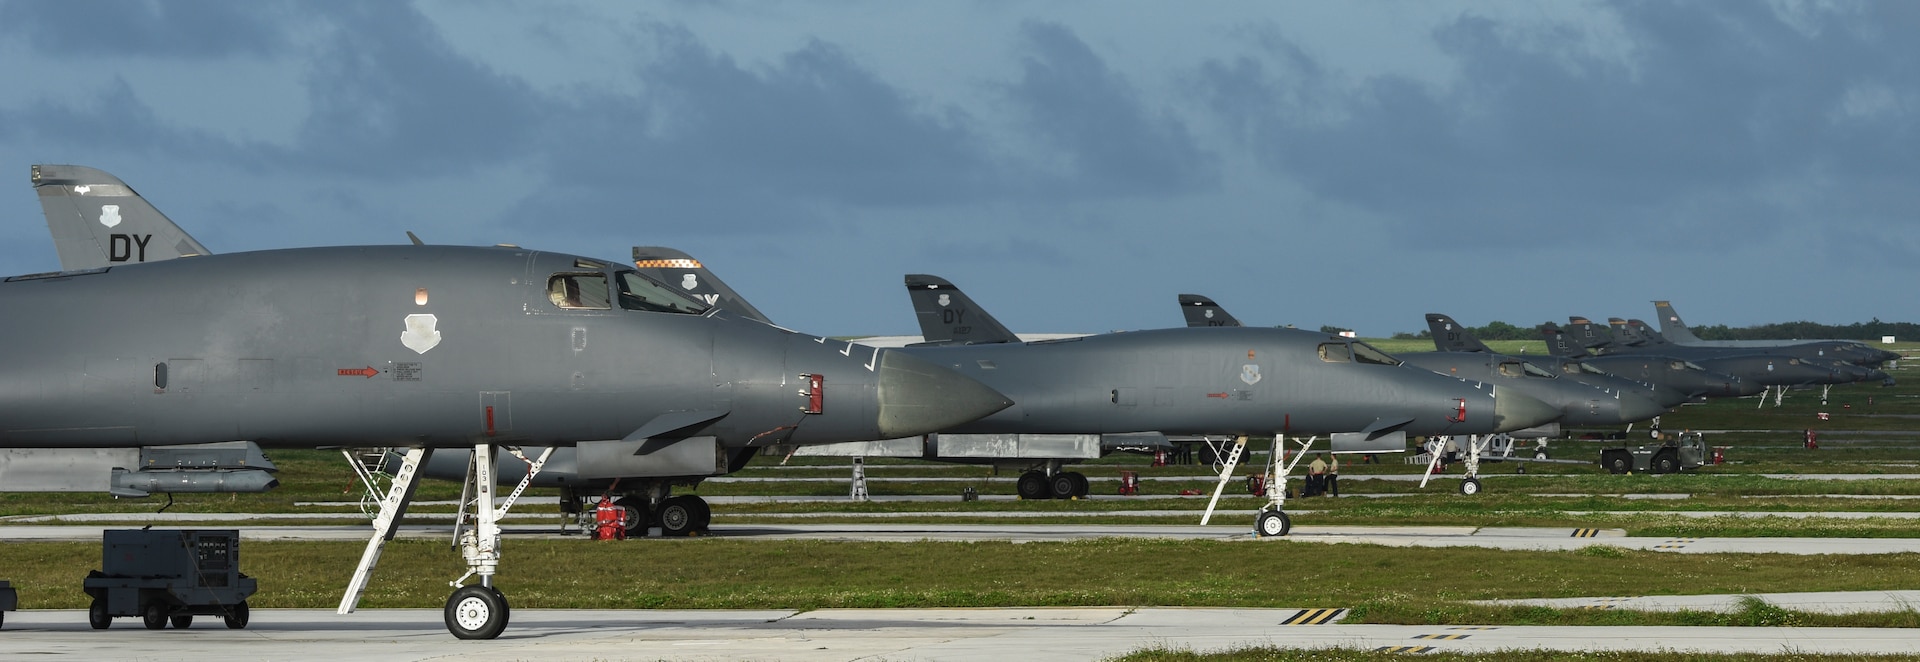 U.S. Air Force B-1B Lancers assigned to the 9th Expeditionary Bomb Squadron, deployed from Dyess Air Force Base, Texas, and the 34th EBS, assigned to Ellsworth Air Force Base, S.D., sit beside one another on the flightline Feb. 6, 2017, at Andersen AFB, Guam. The 9th EBS is taking over U.S. Pacific Command’s Continuous Bomber Presence operations from the 34th EBS. The CBP mission is part of a long-standing history of maintaining a consistent bomber presence in the Indo-Asia-Pacific in order to maintain regional stability, and provide assurance to our allies and partners in the region. 